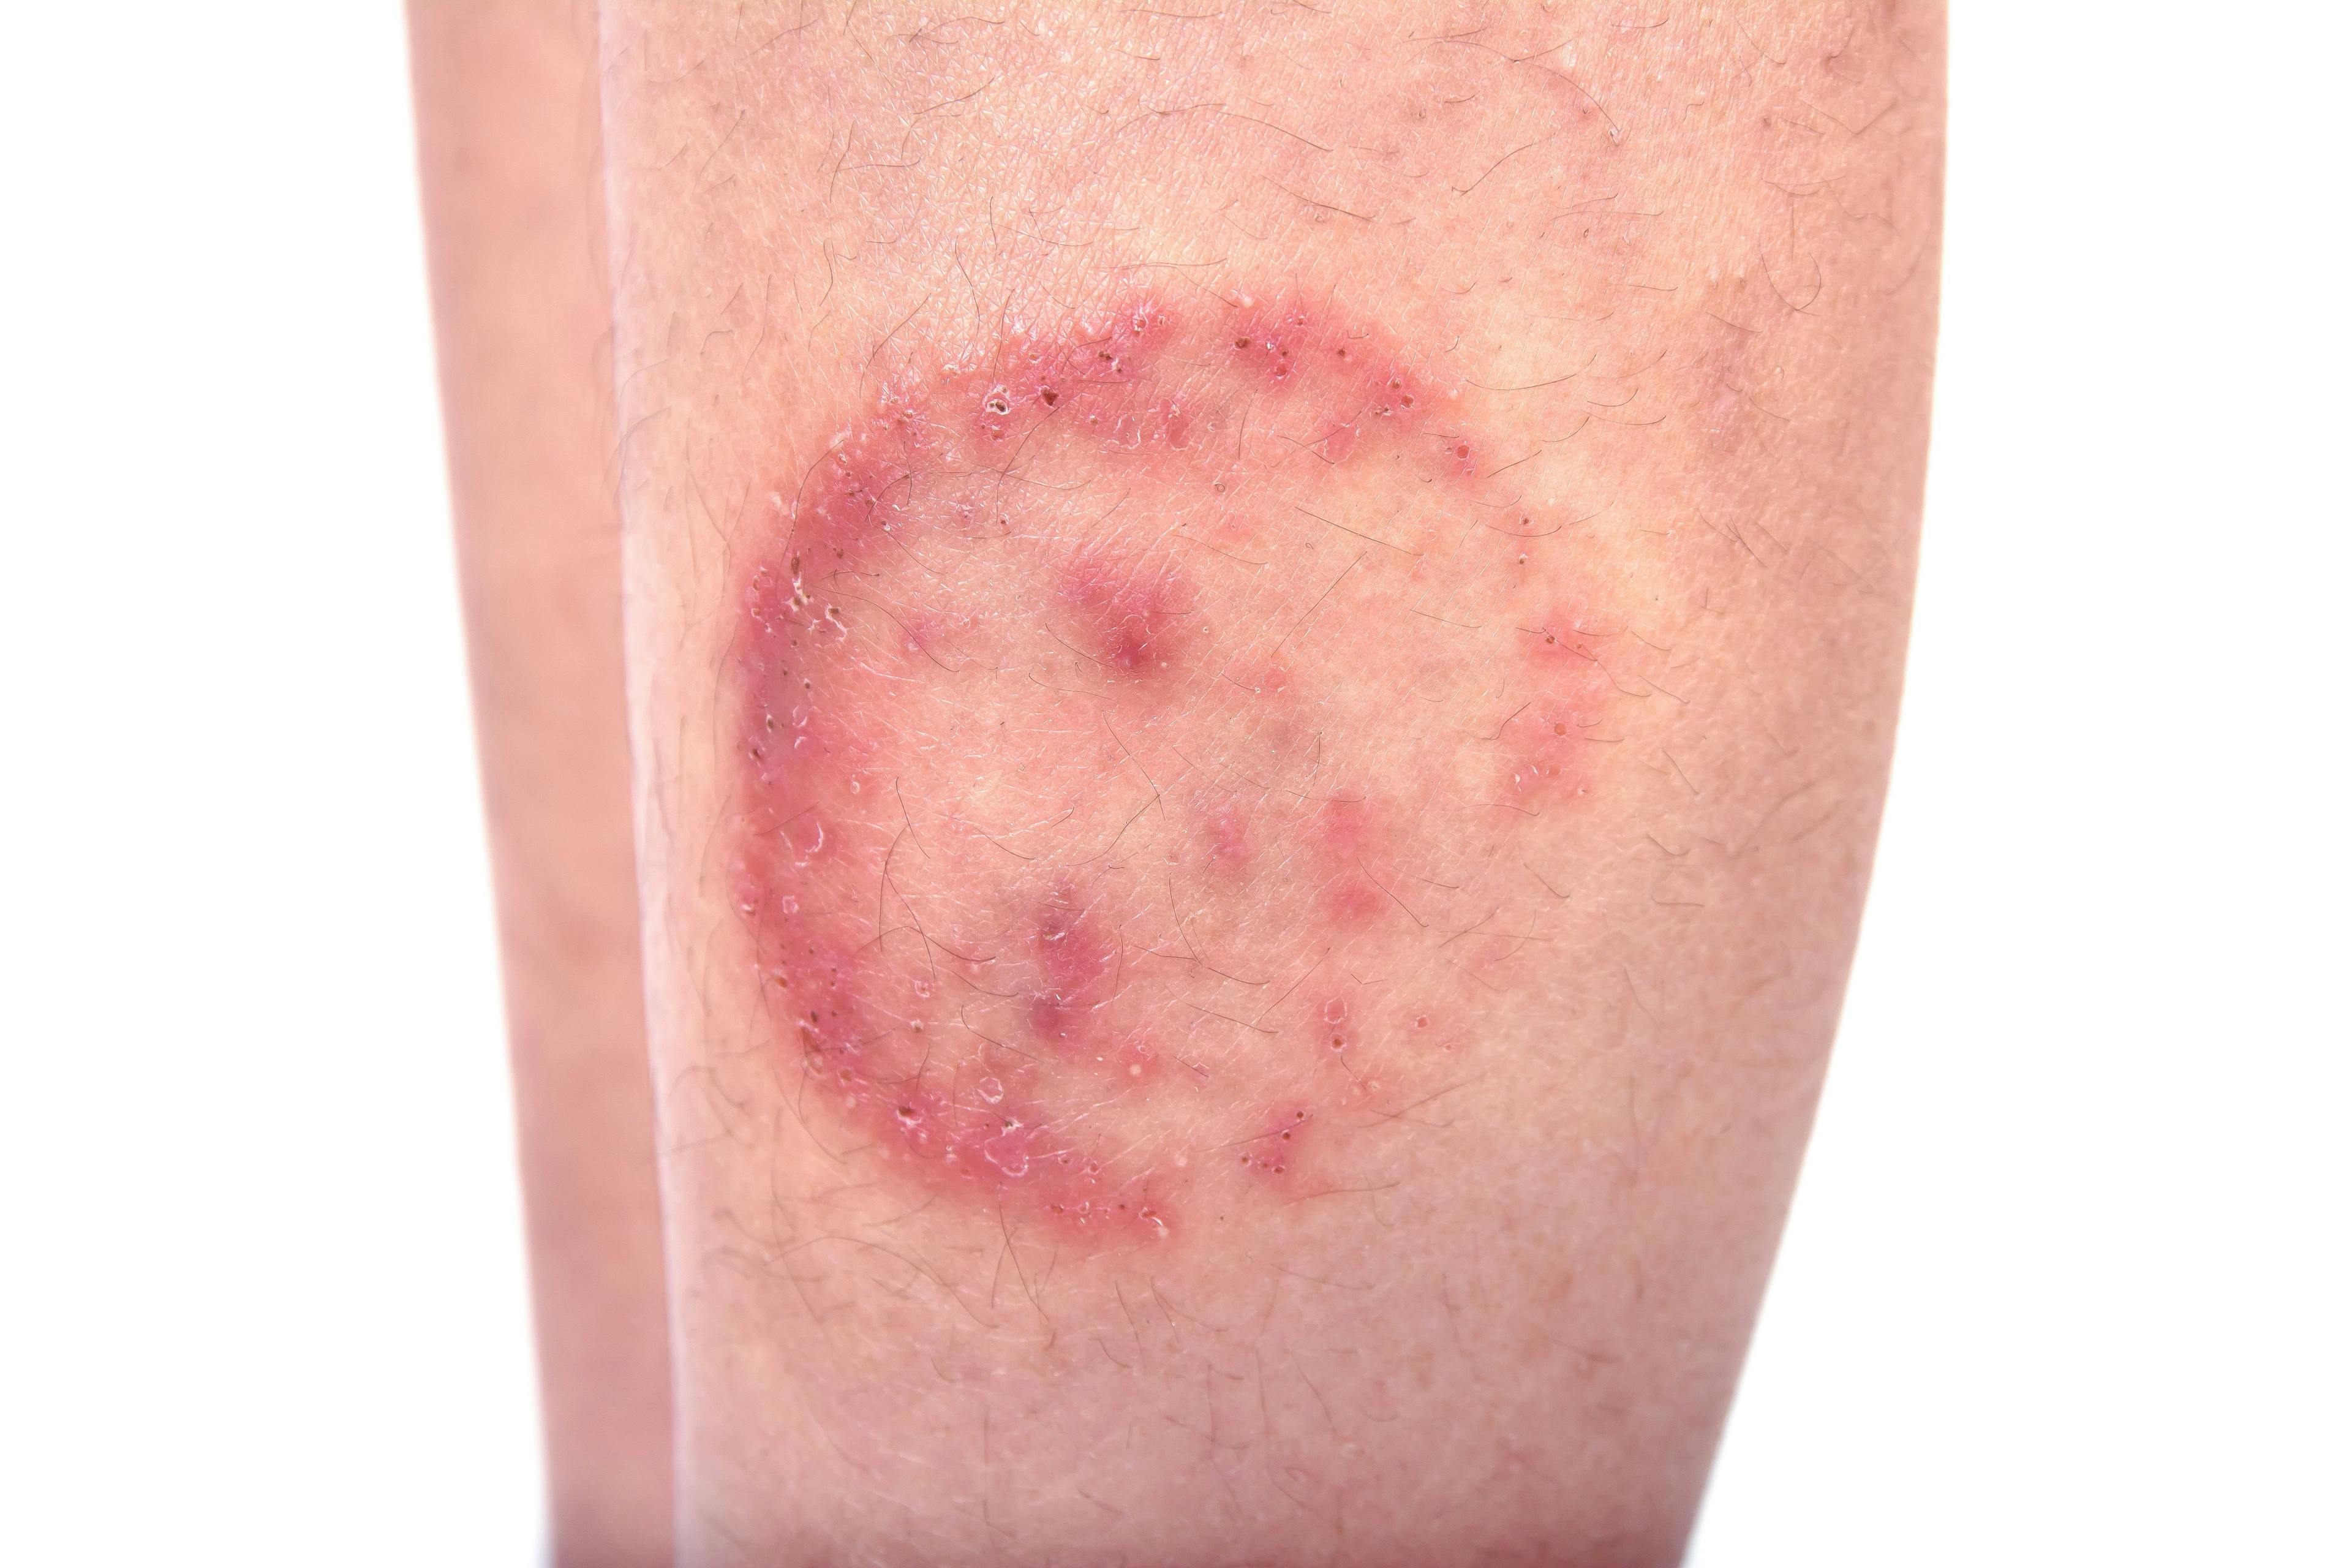 New, Difficult-to-Treat Fungal Skin Infections Are Emerging, Clinicians Warn